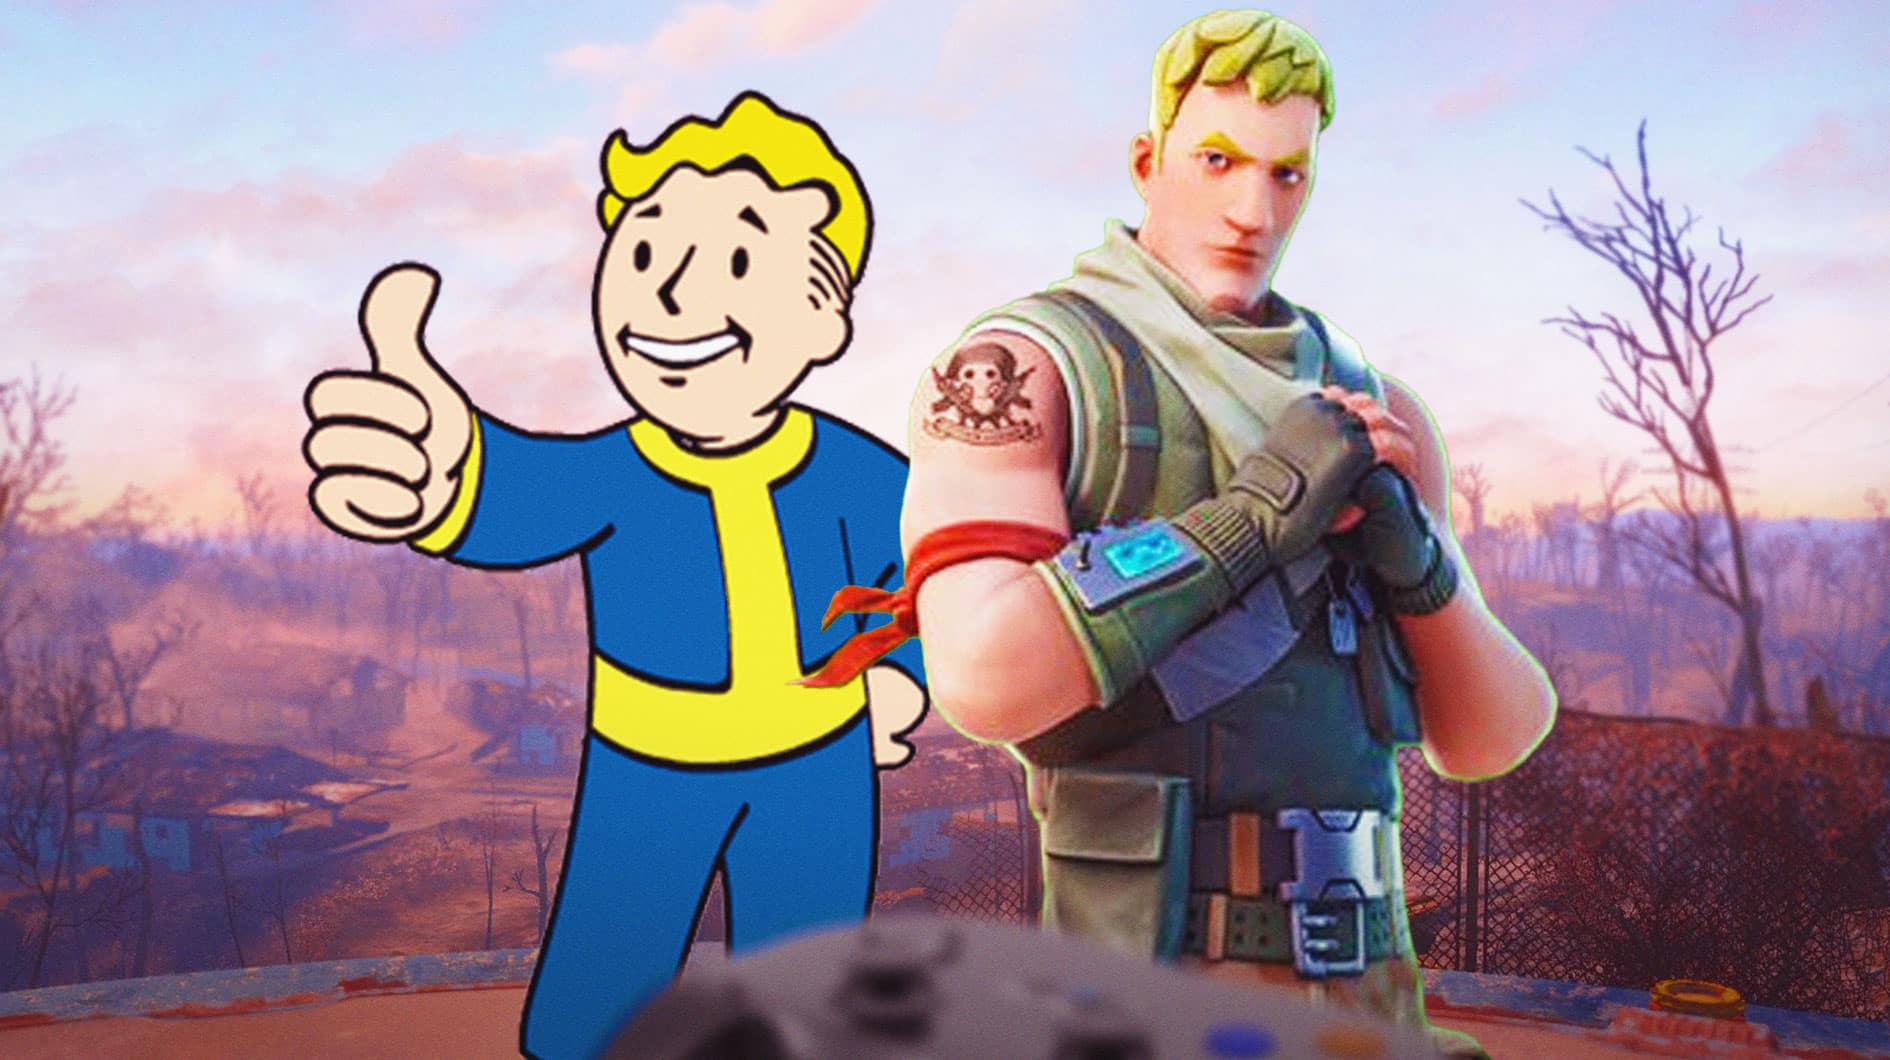 Epic Games Confirms Fortnite's Collaboration with Fallout